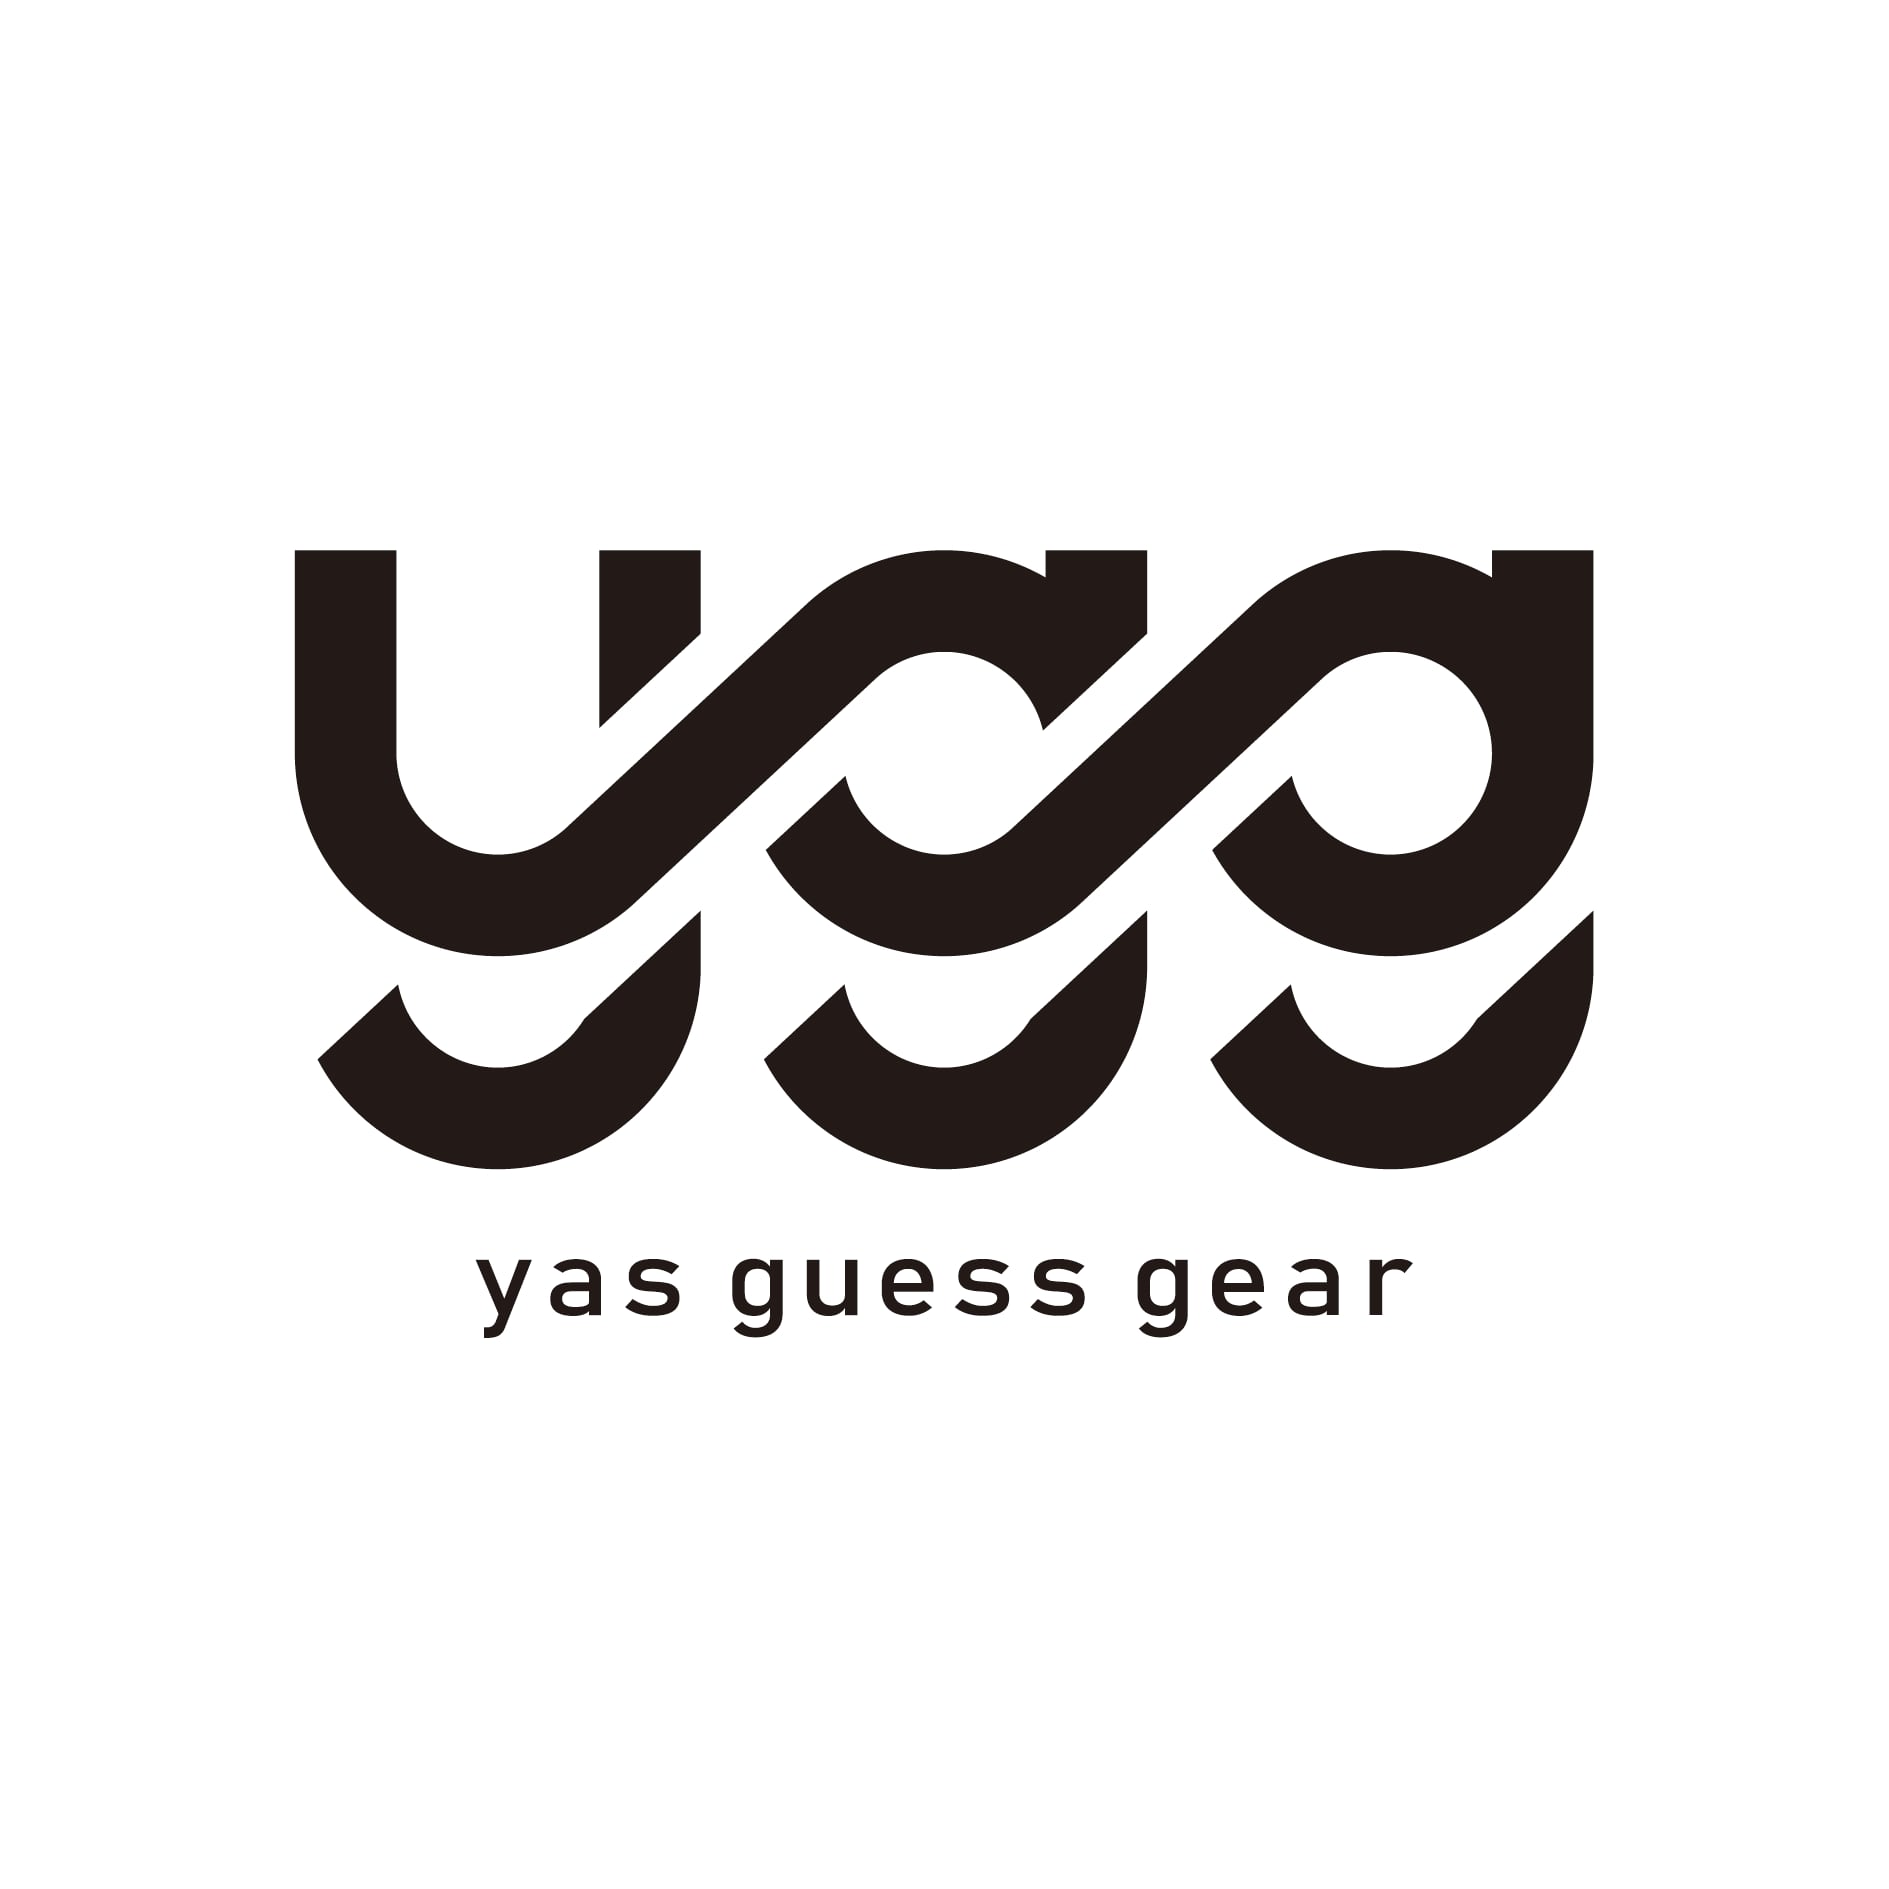 yas guess gear